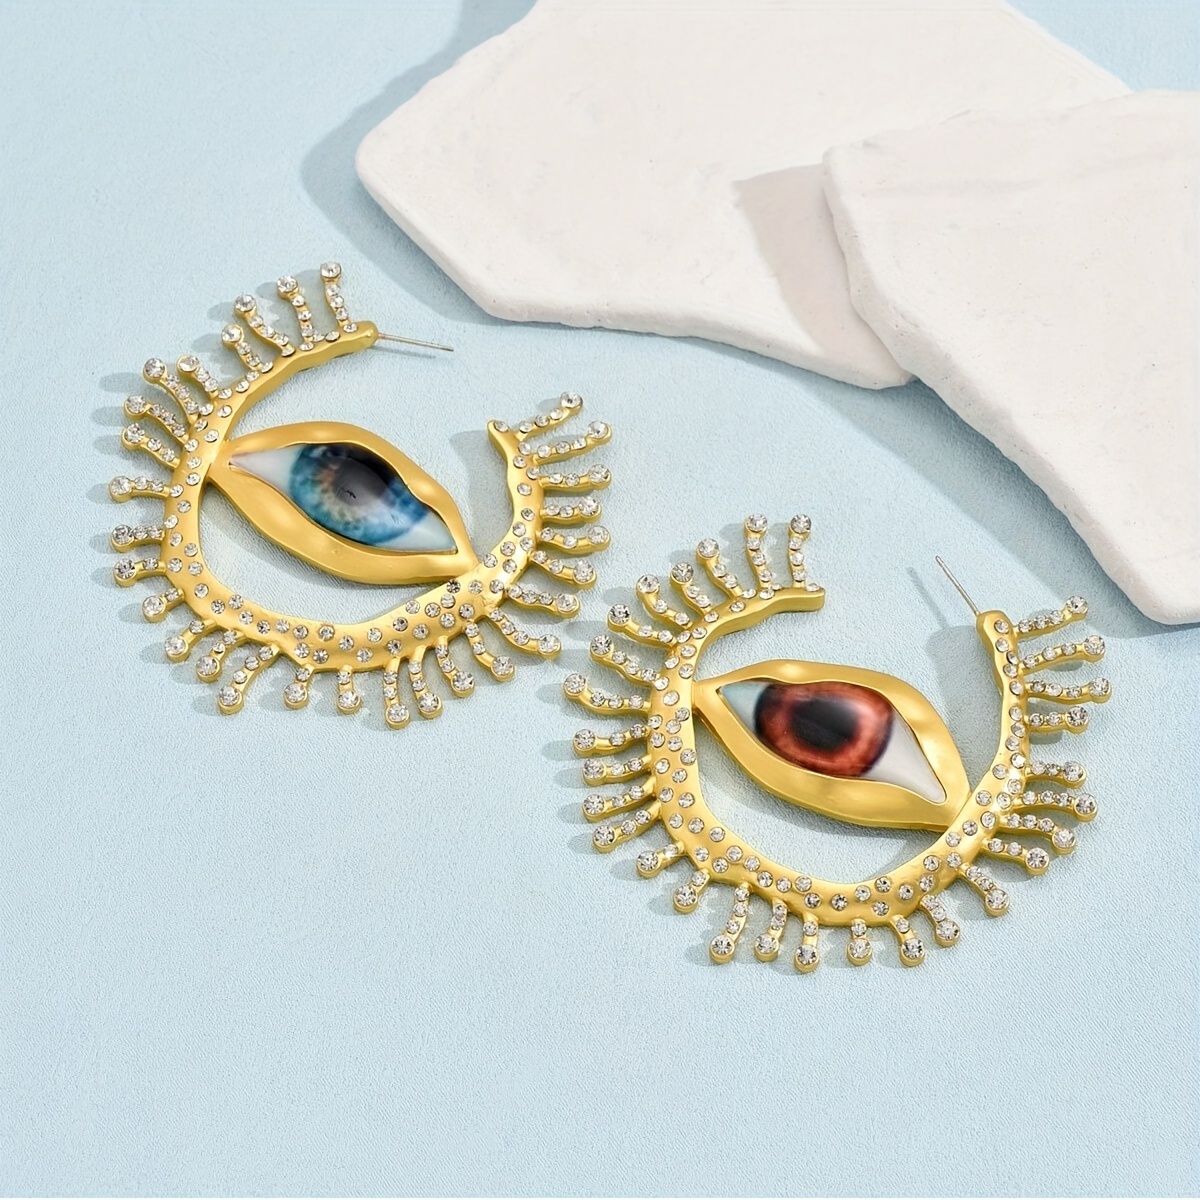 

1 Pair Metallic Rhinestone Exaggerated Eye Shaped Dangle Earrings, Punk Cool Style Statement Earrings, Suitable For Party Vacation Daily Wearing Jewelry